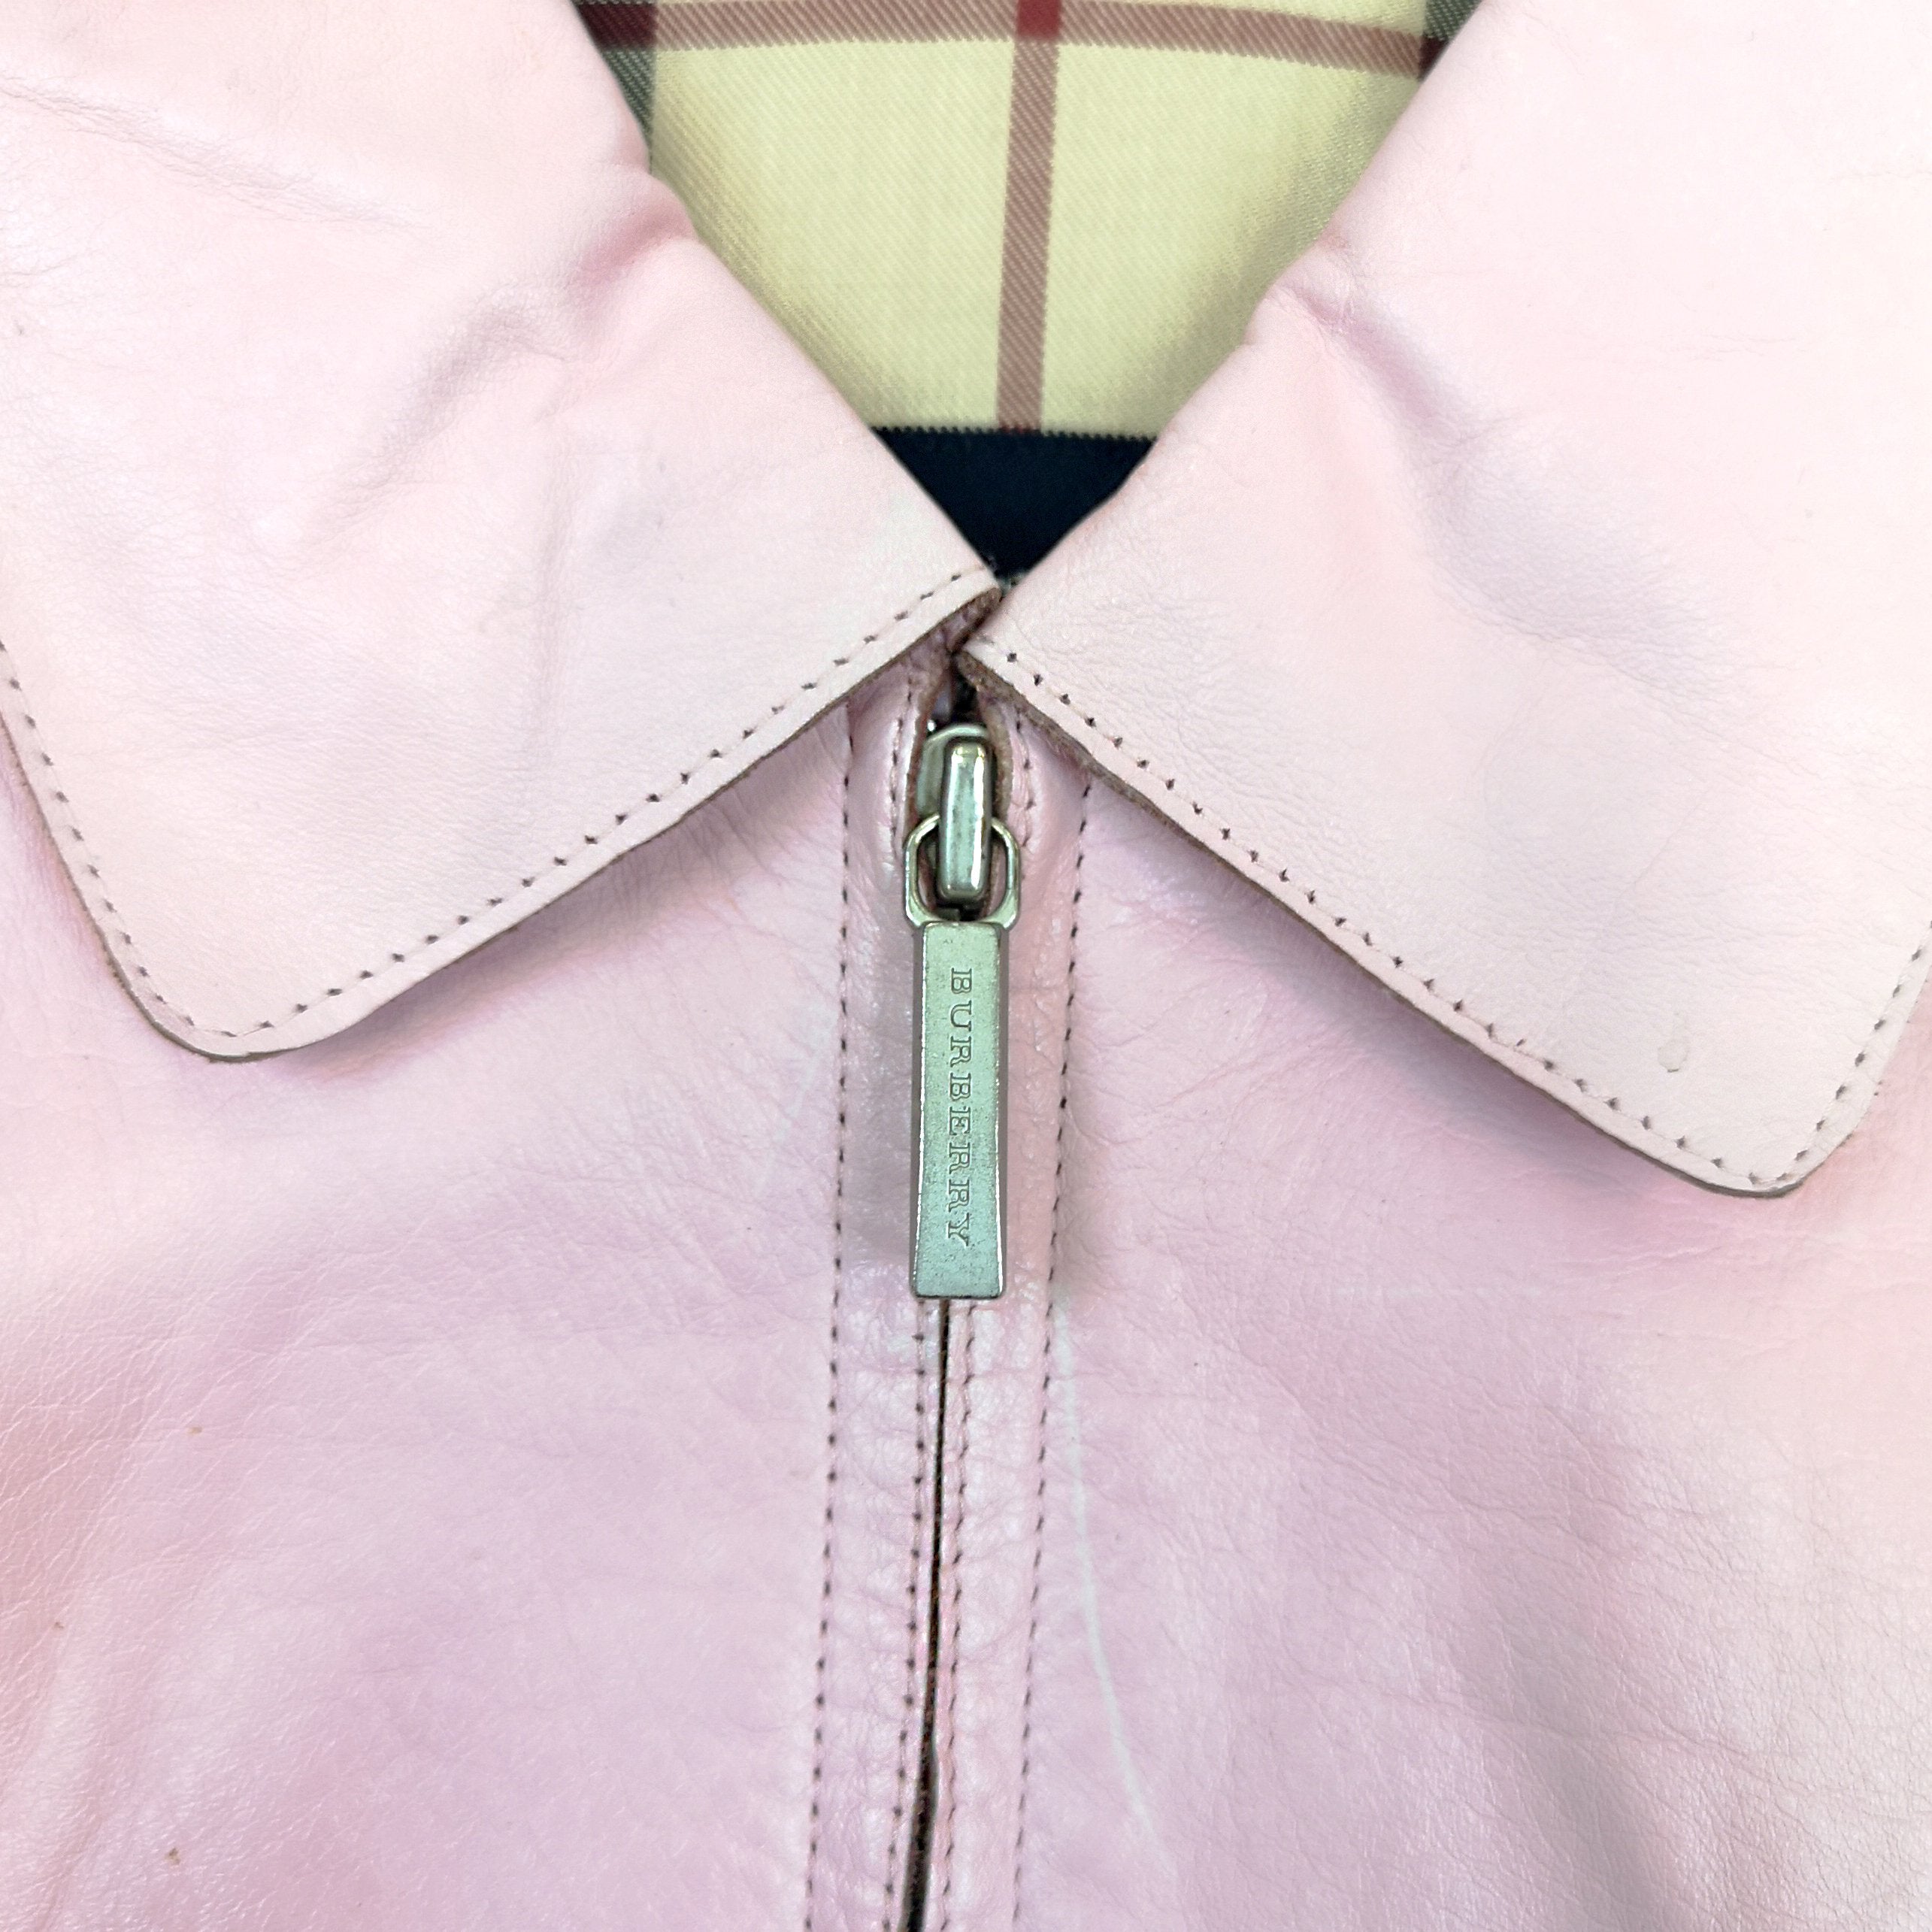 Burberry Pink Leather Jacket with Zipper